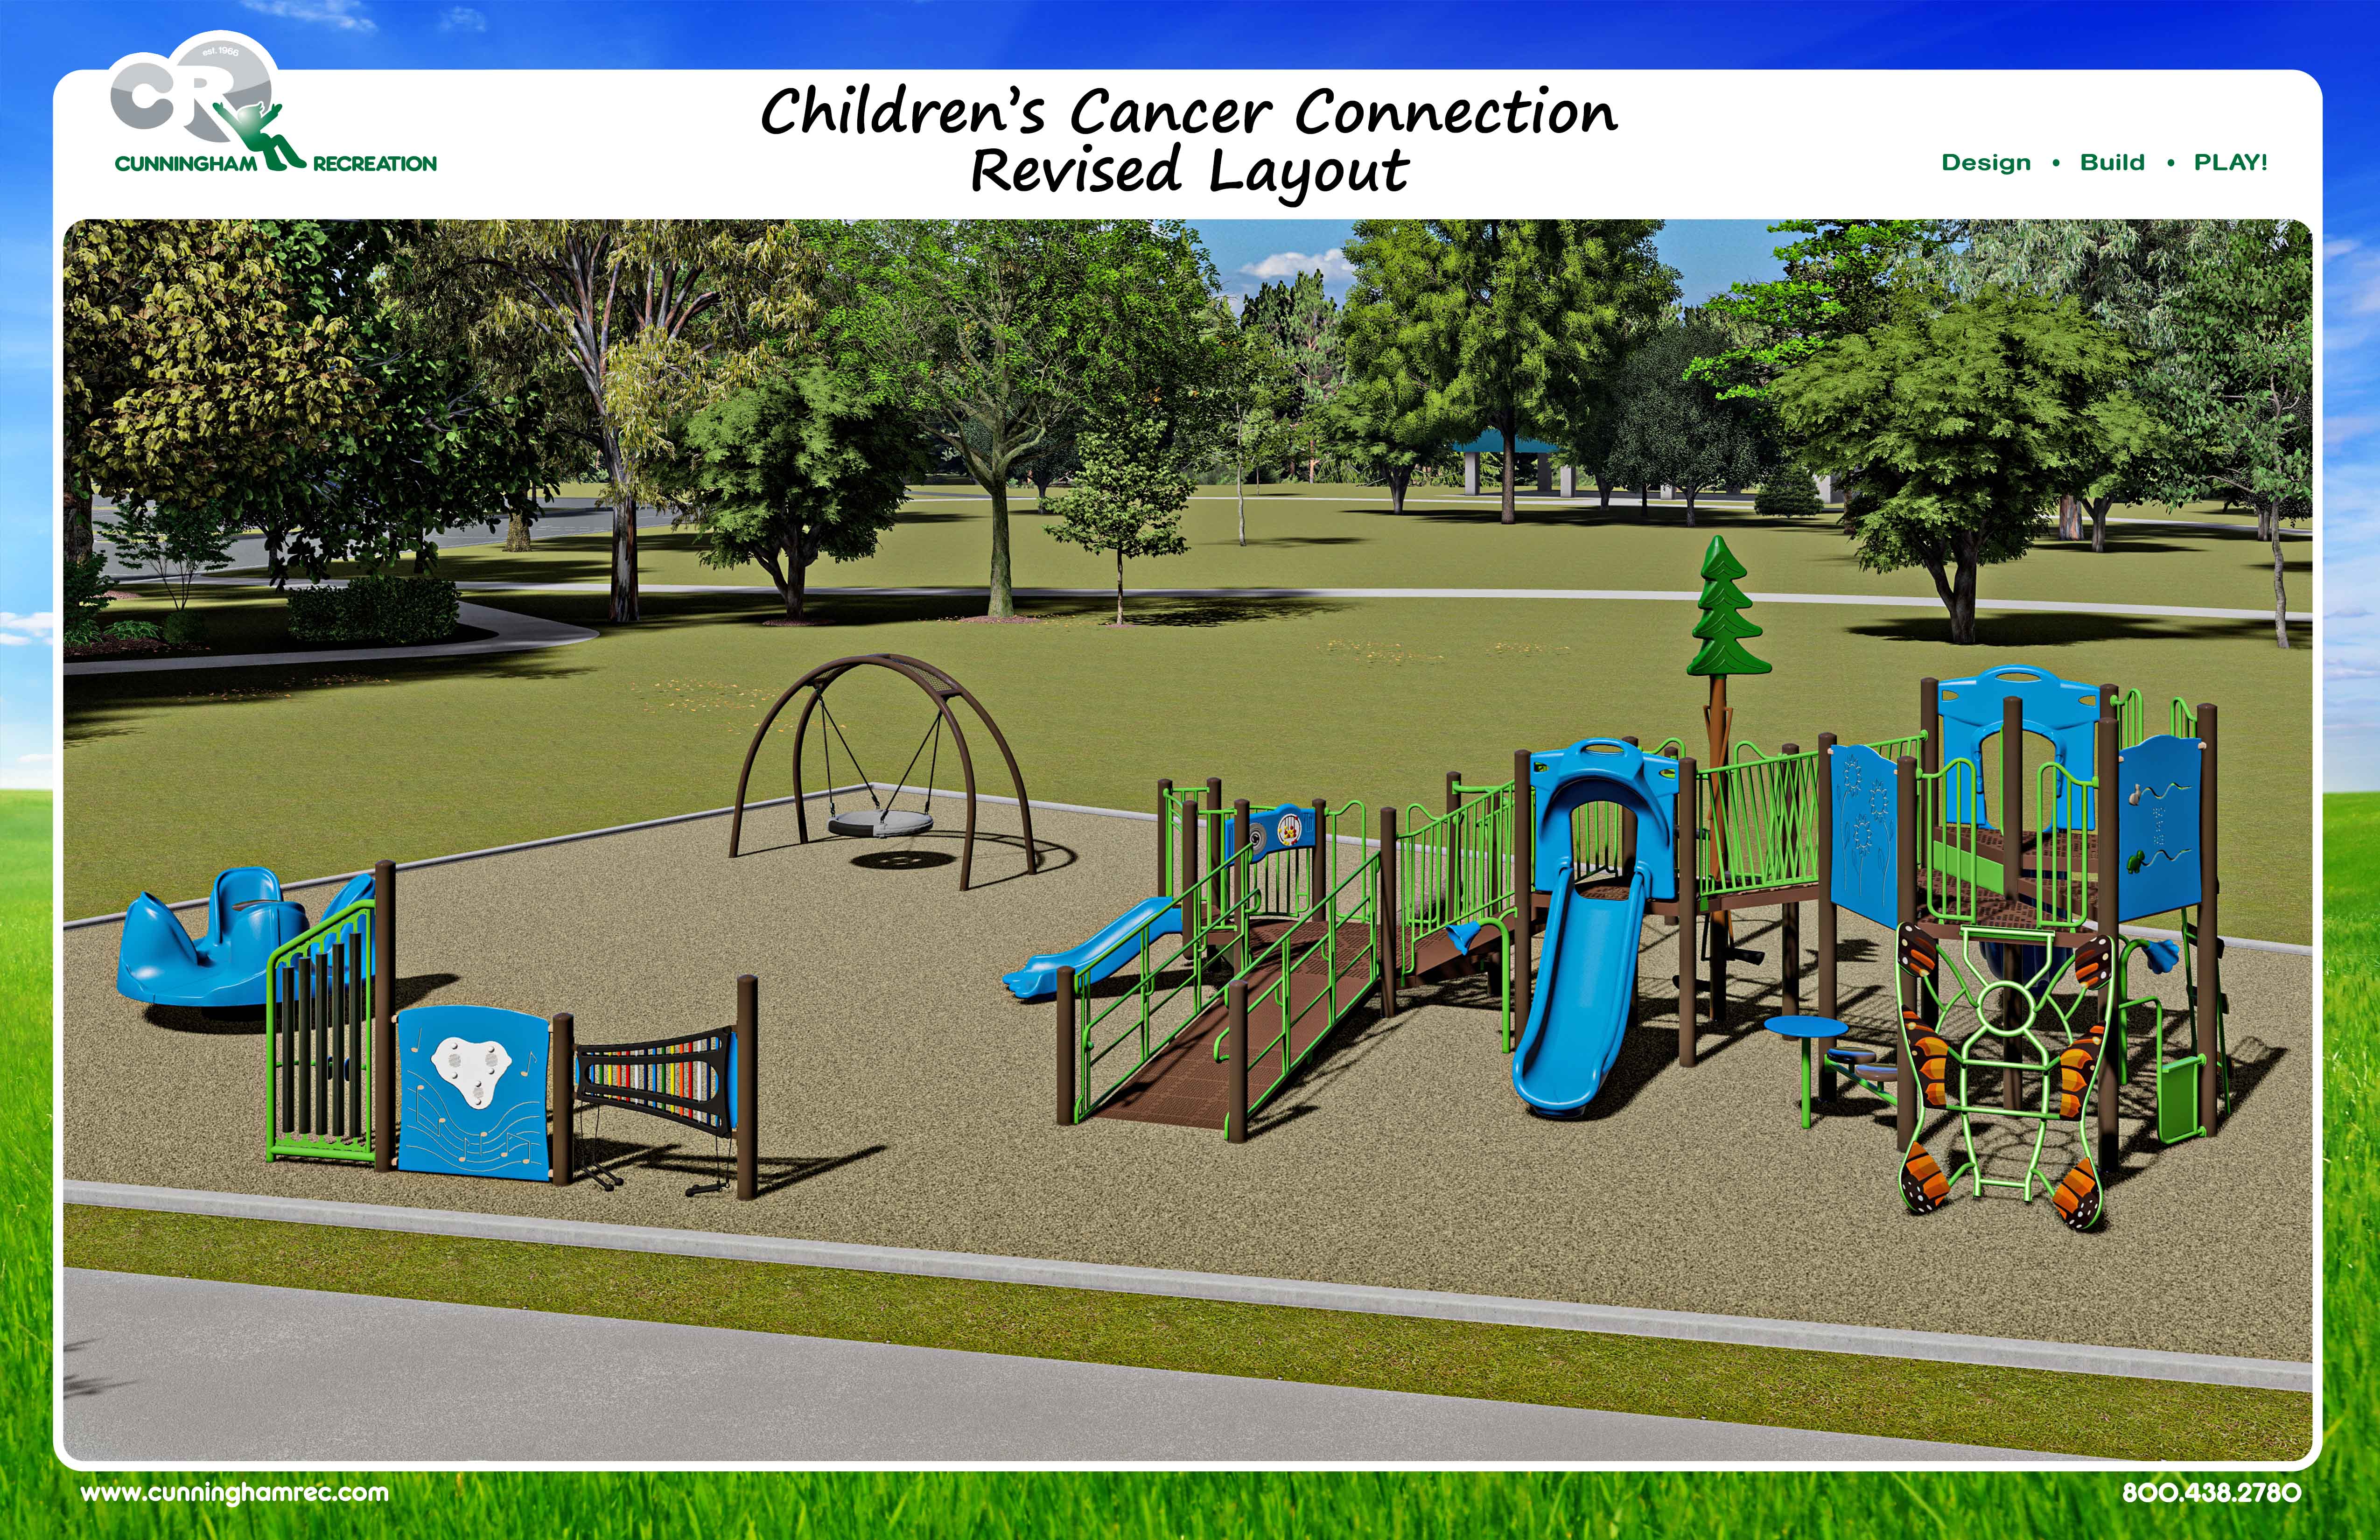 Childrens Cancer Connection Receives Inclusive Playground Grant From